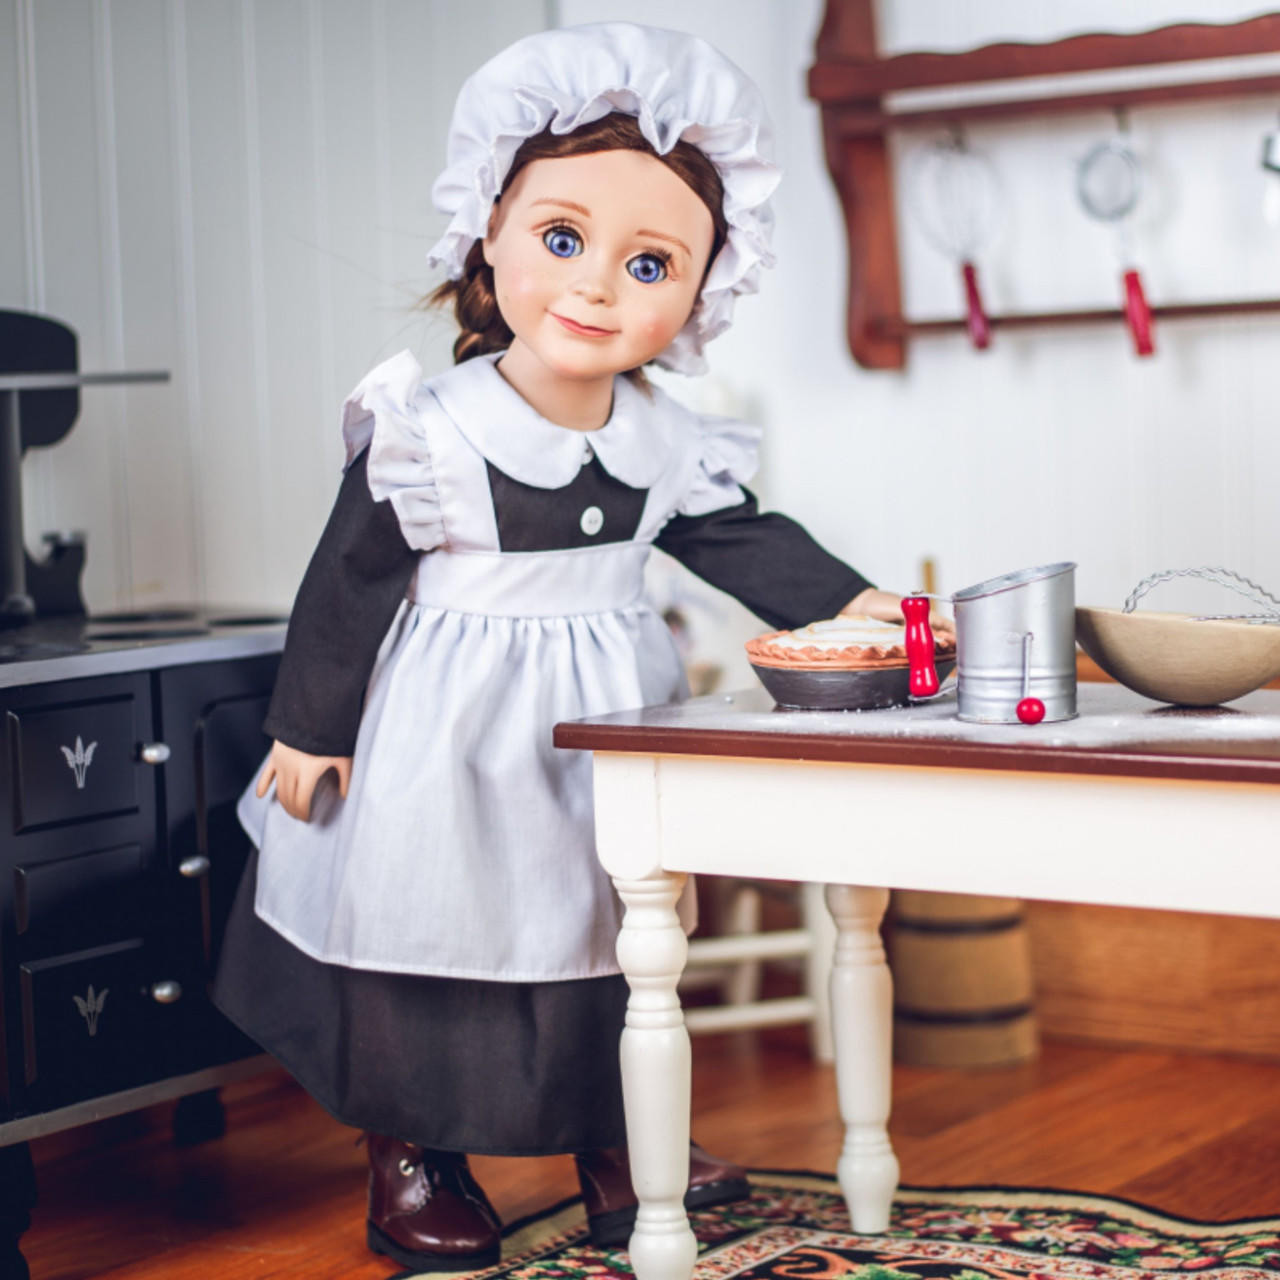 5 Piece Kitchen Maid Clothes Outfit with Boots for 18 Dolls